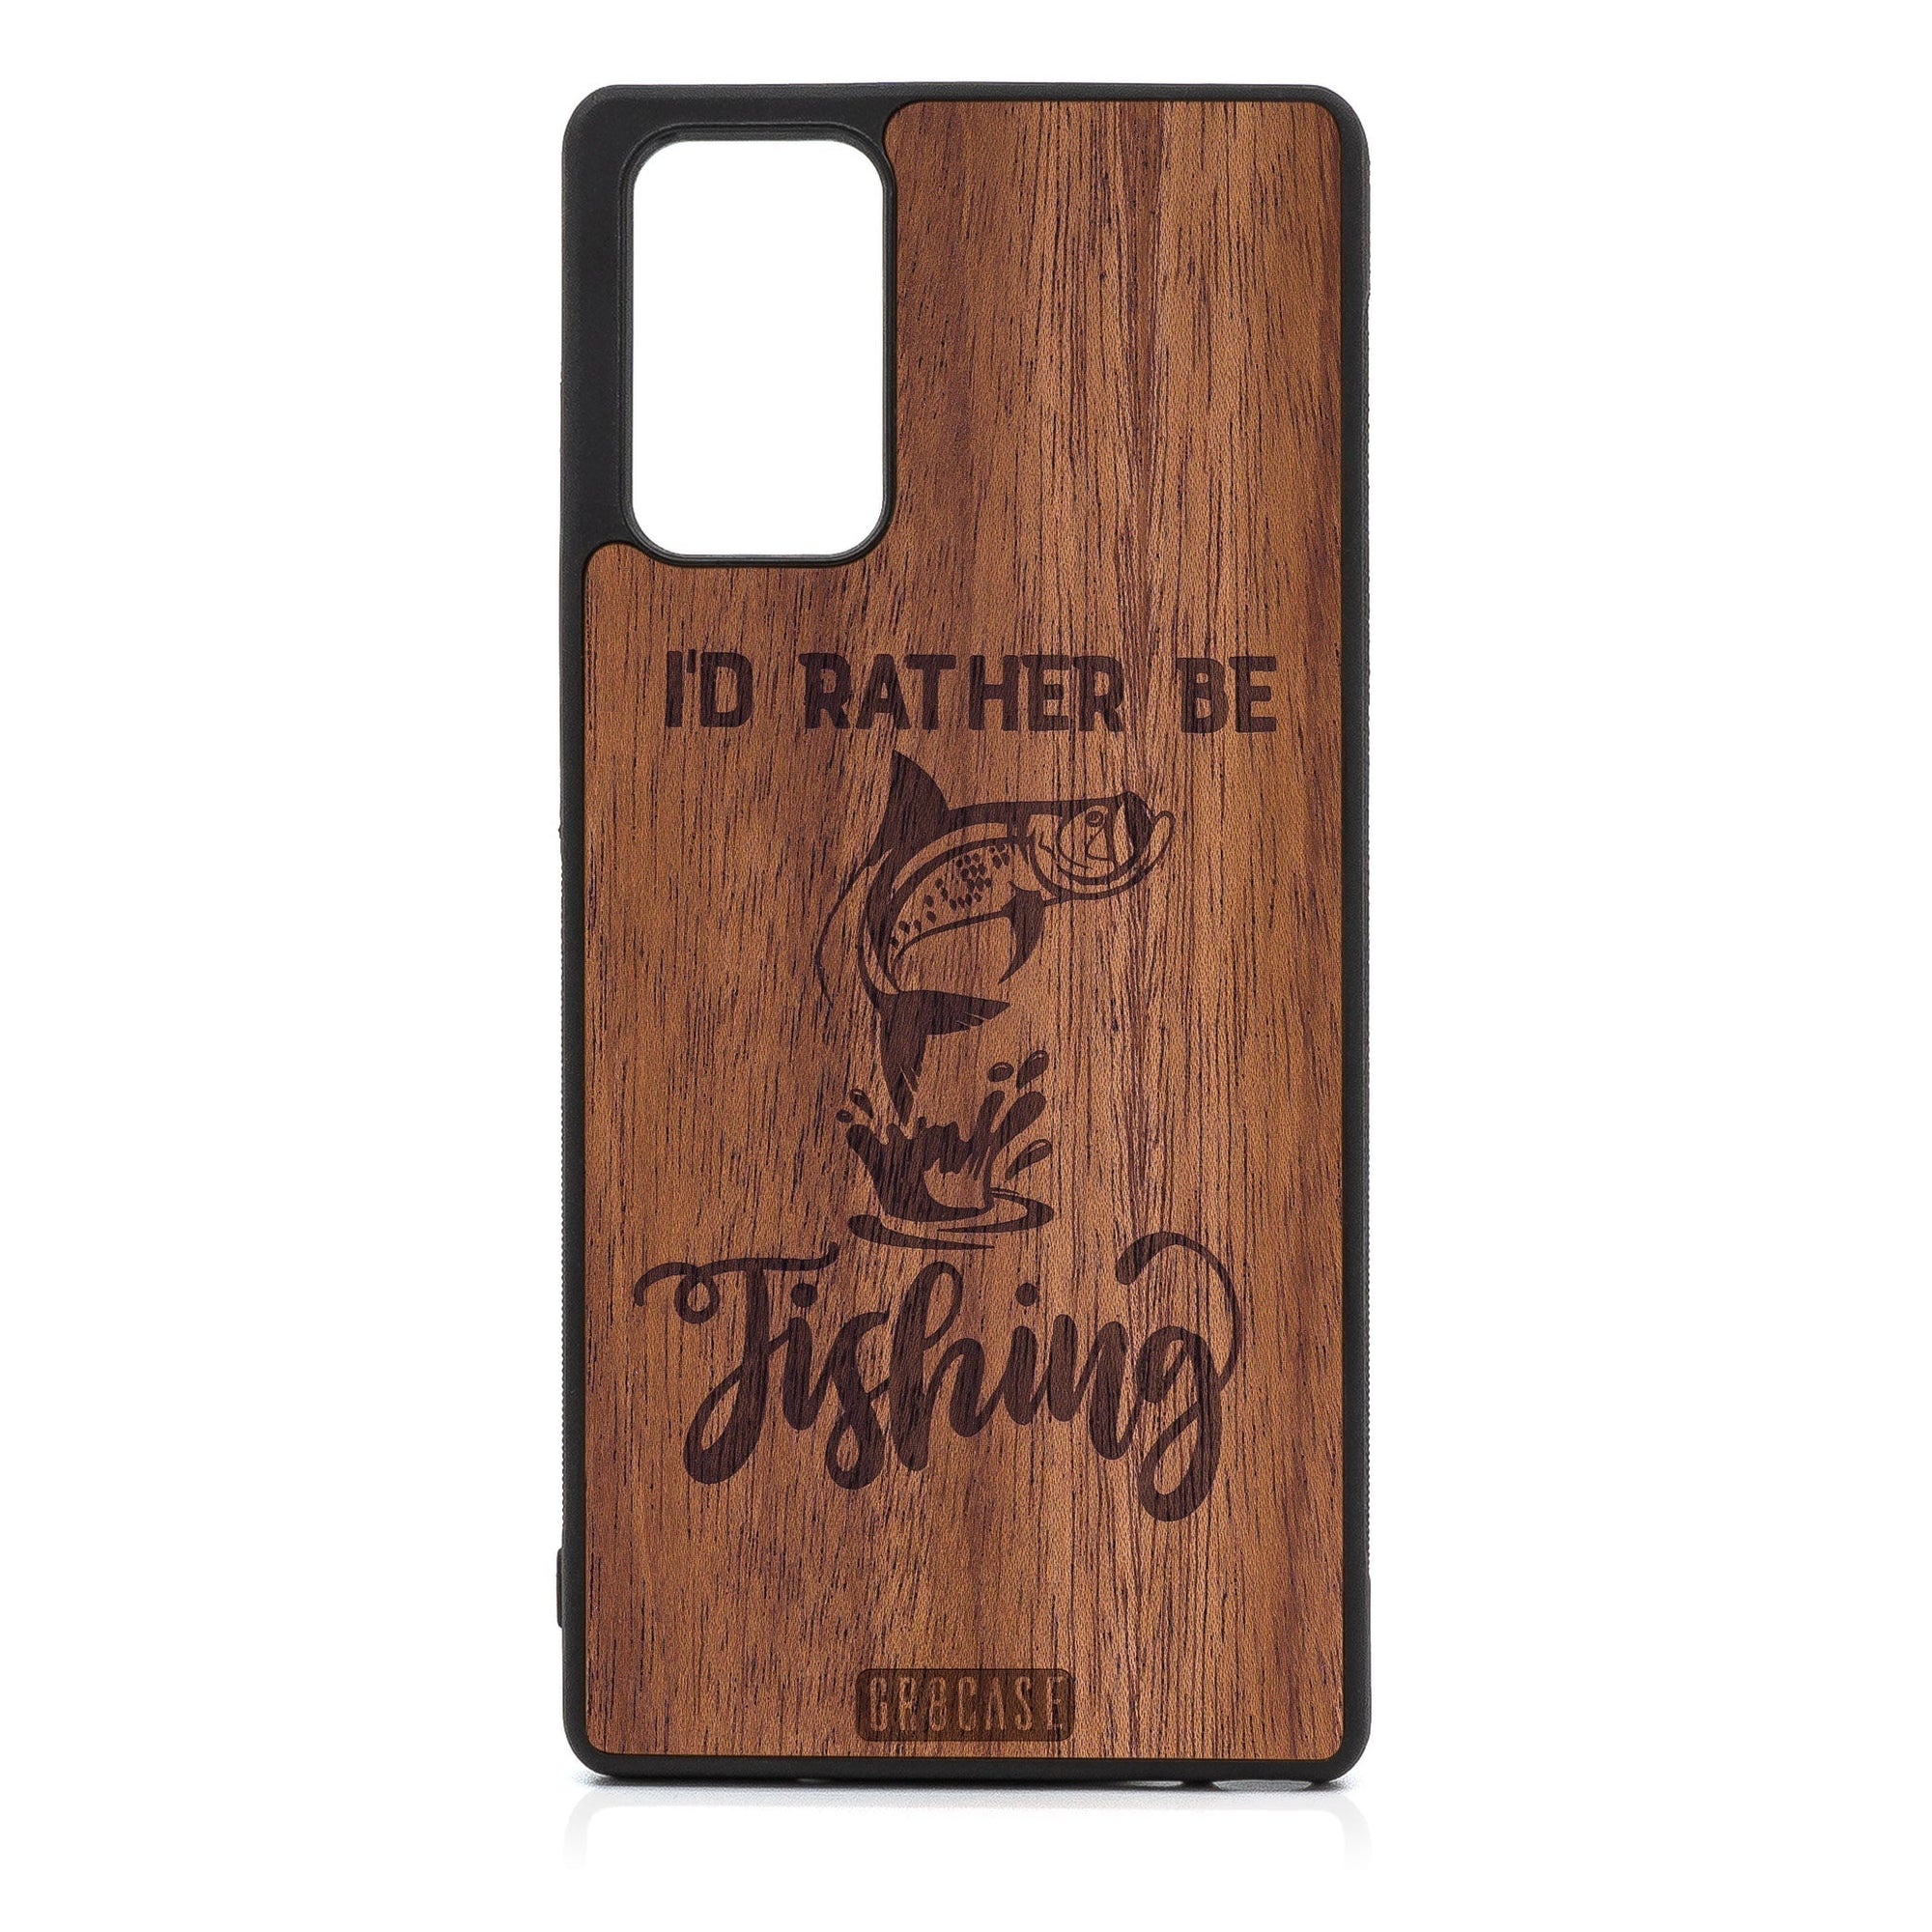 I'D Rather Be Fishing Design Wood Case For Samsung Galaxy A72 5G